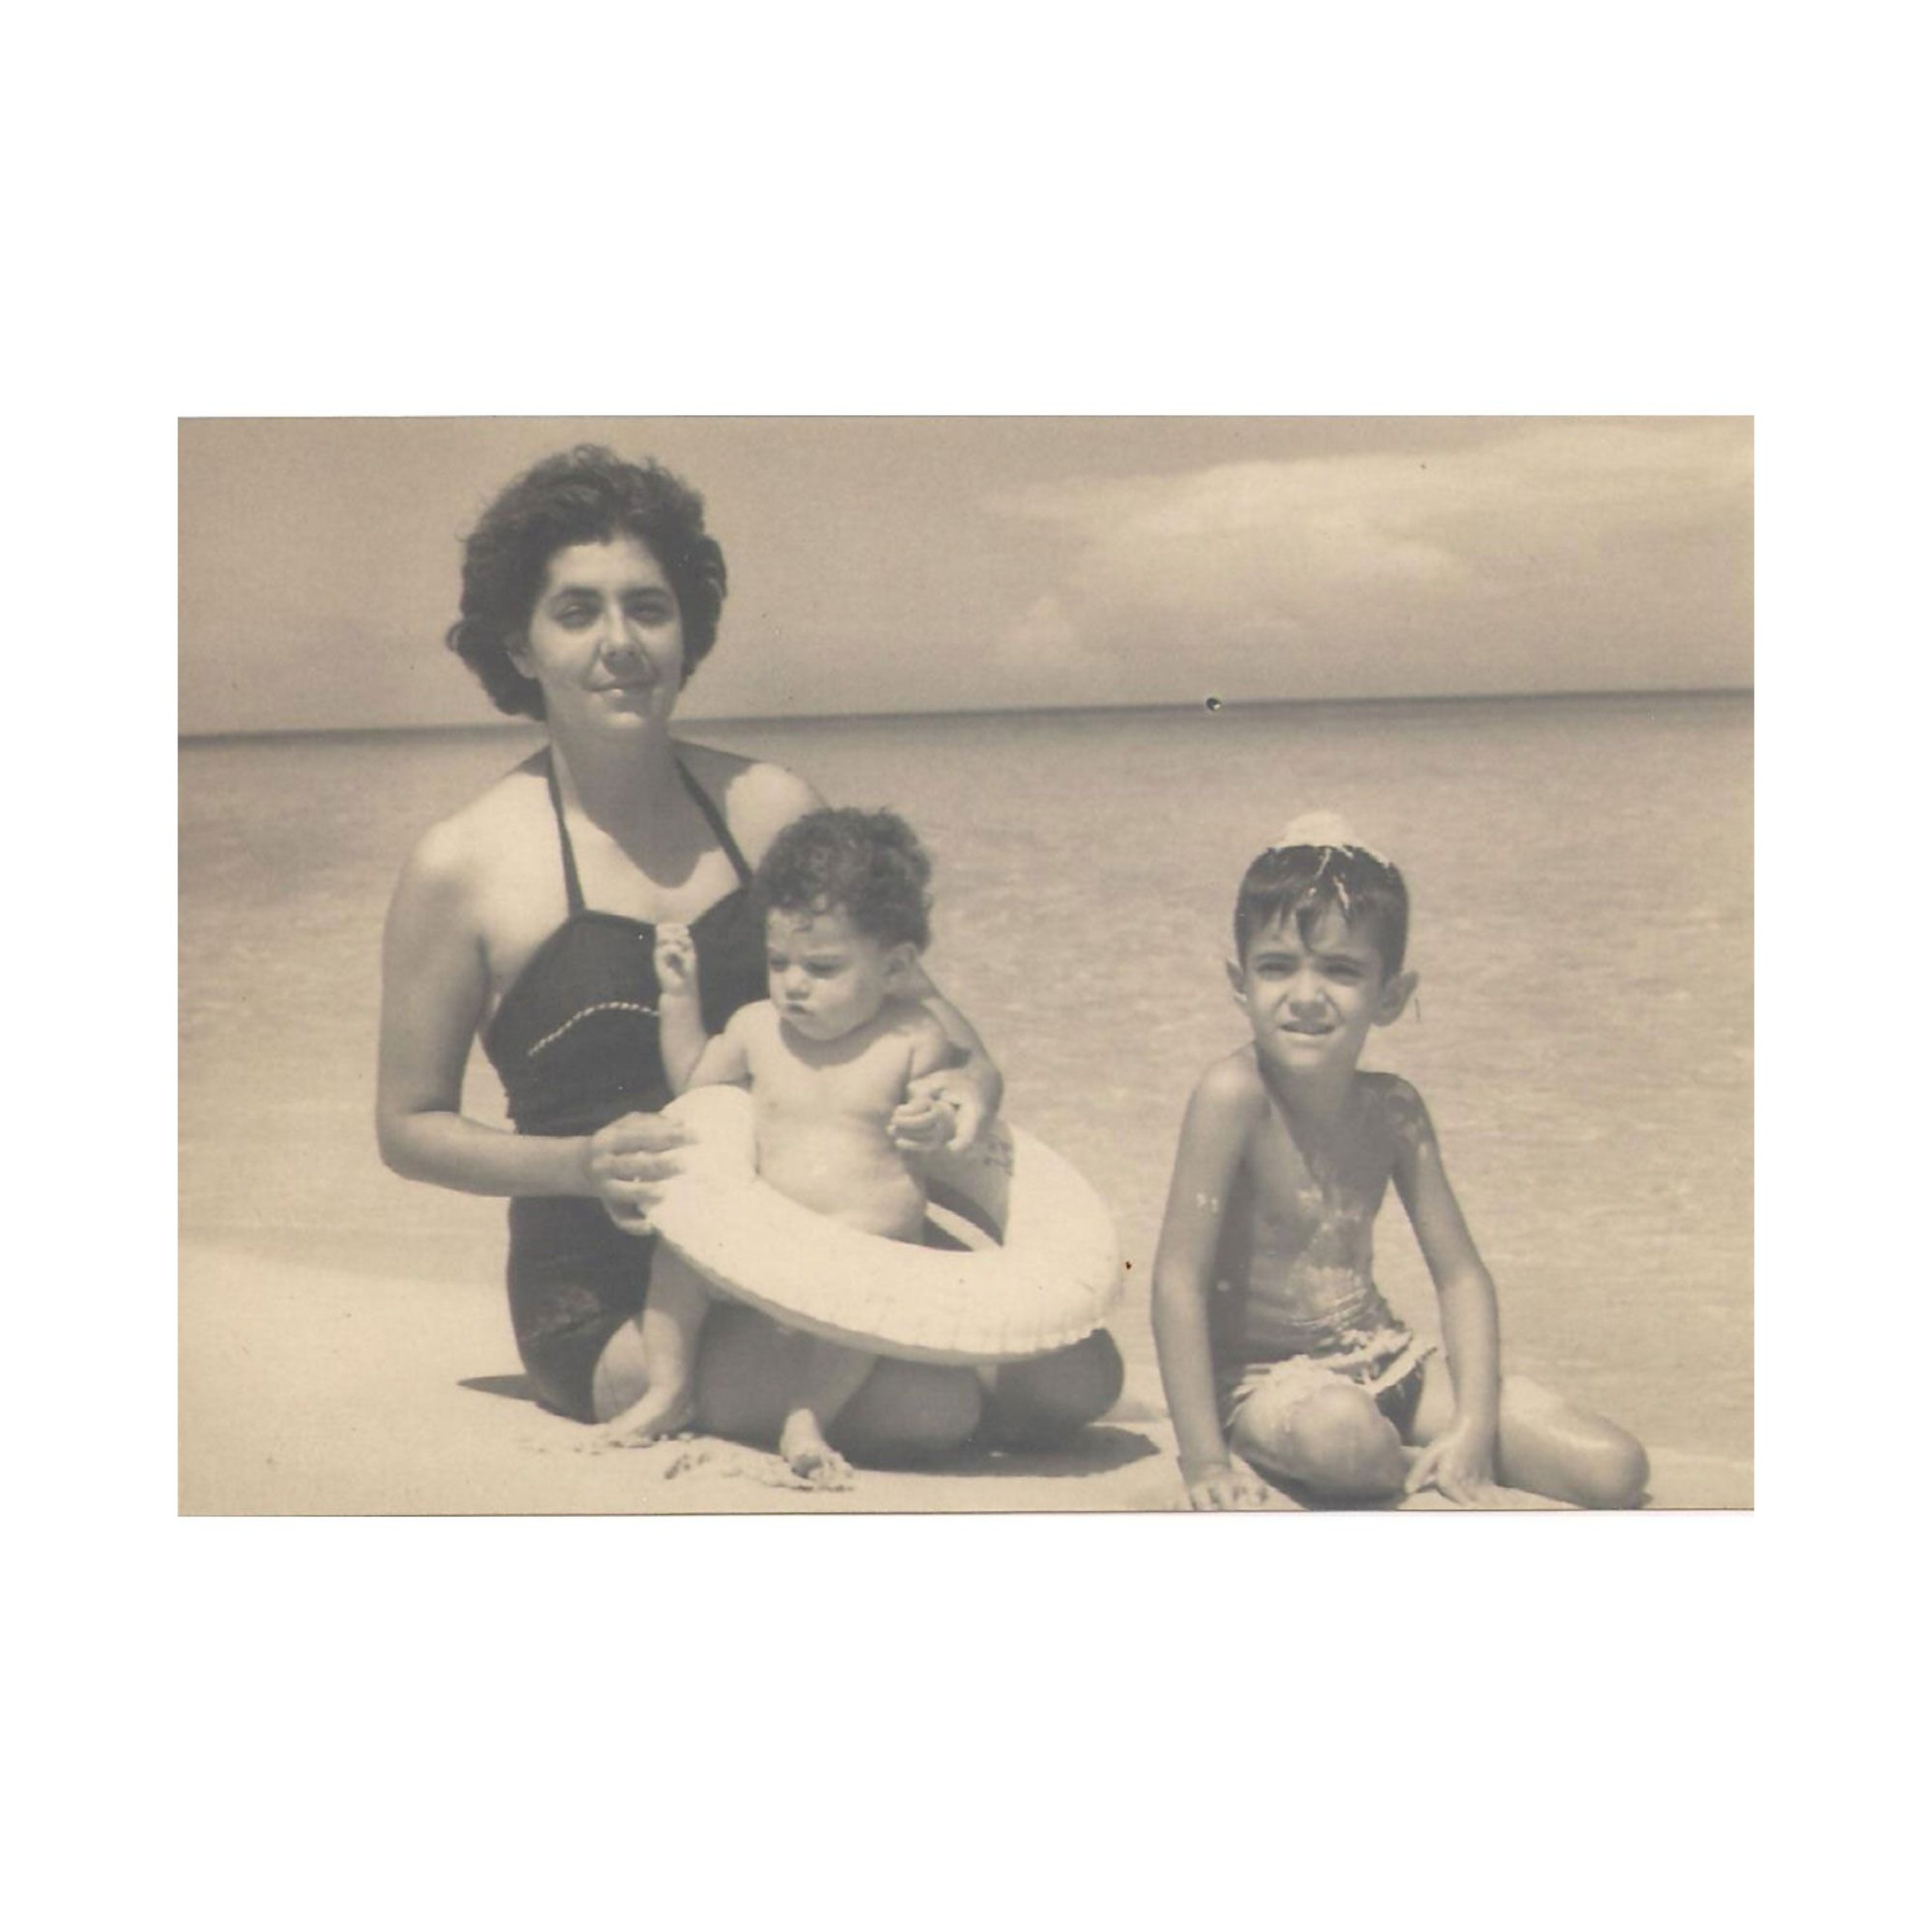 Félix as a child, at the beach with his brother and their mother.